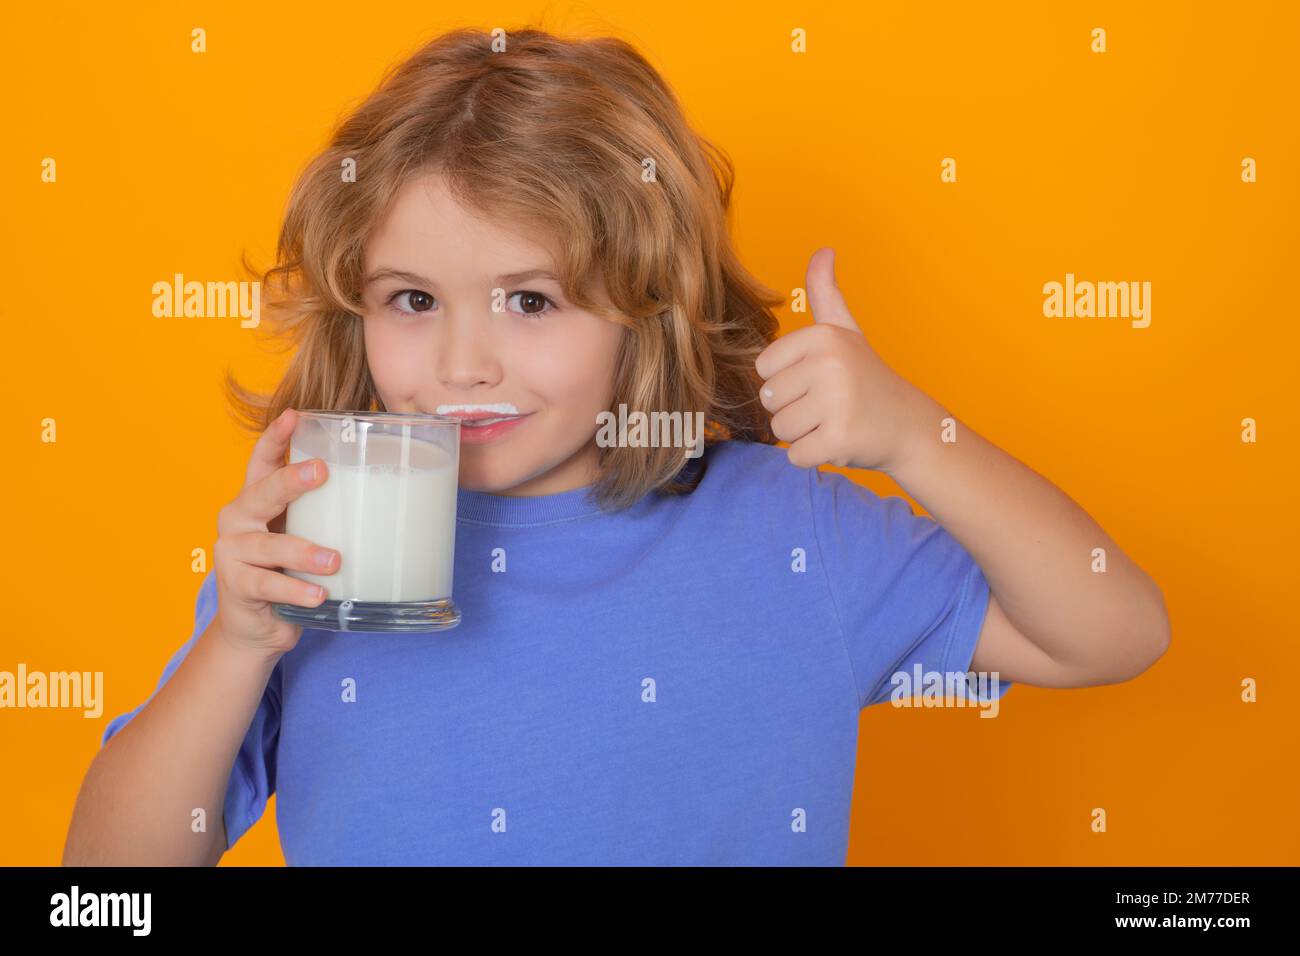 Dairy milk. Little child drinking milk. Kid with glass of milk on yellow isolated background. Stock Photo